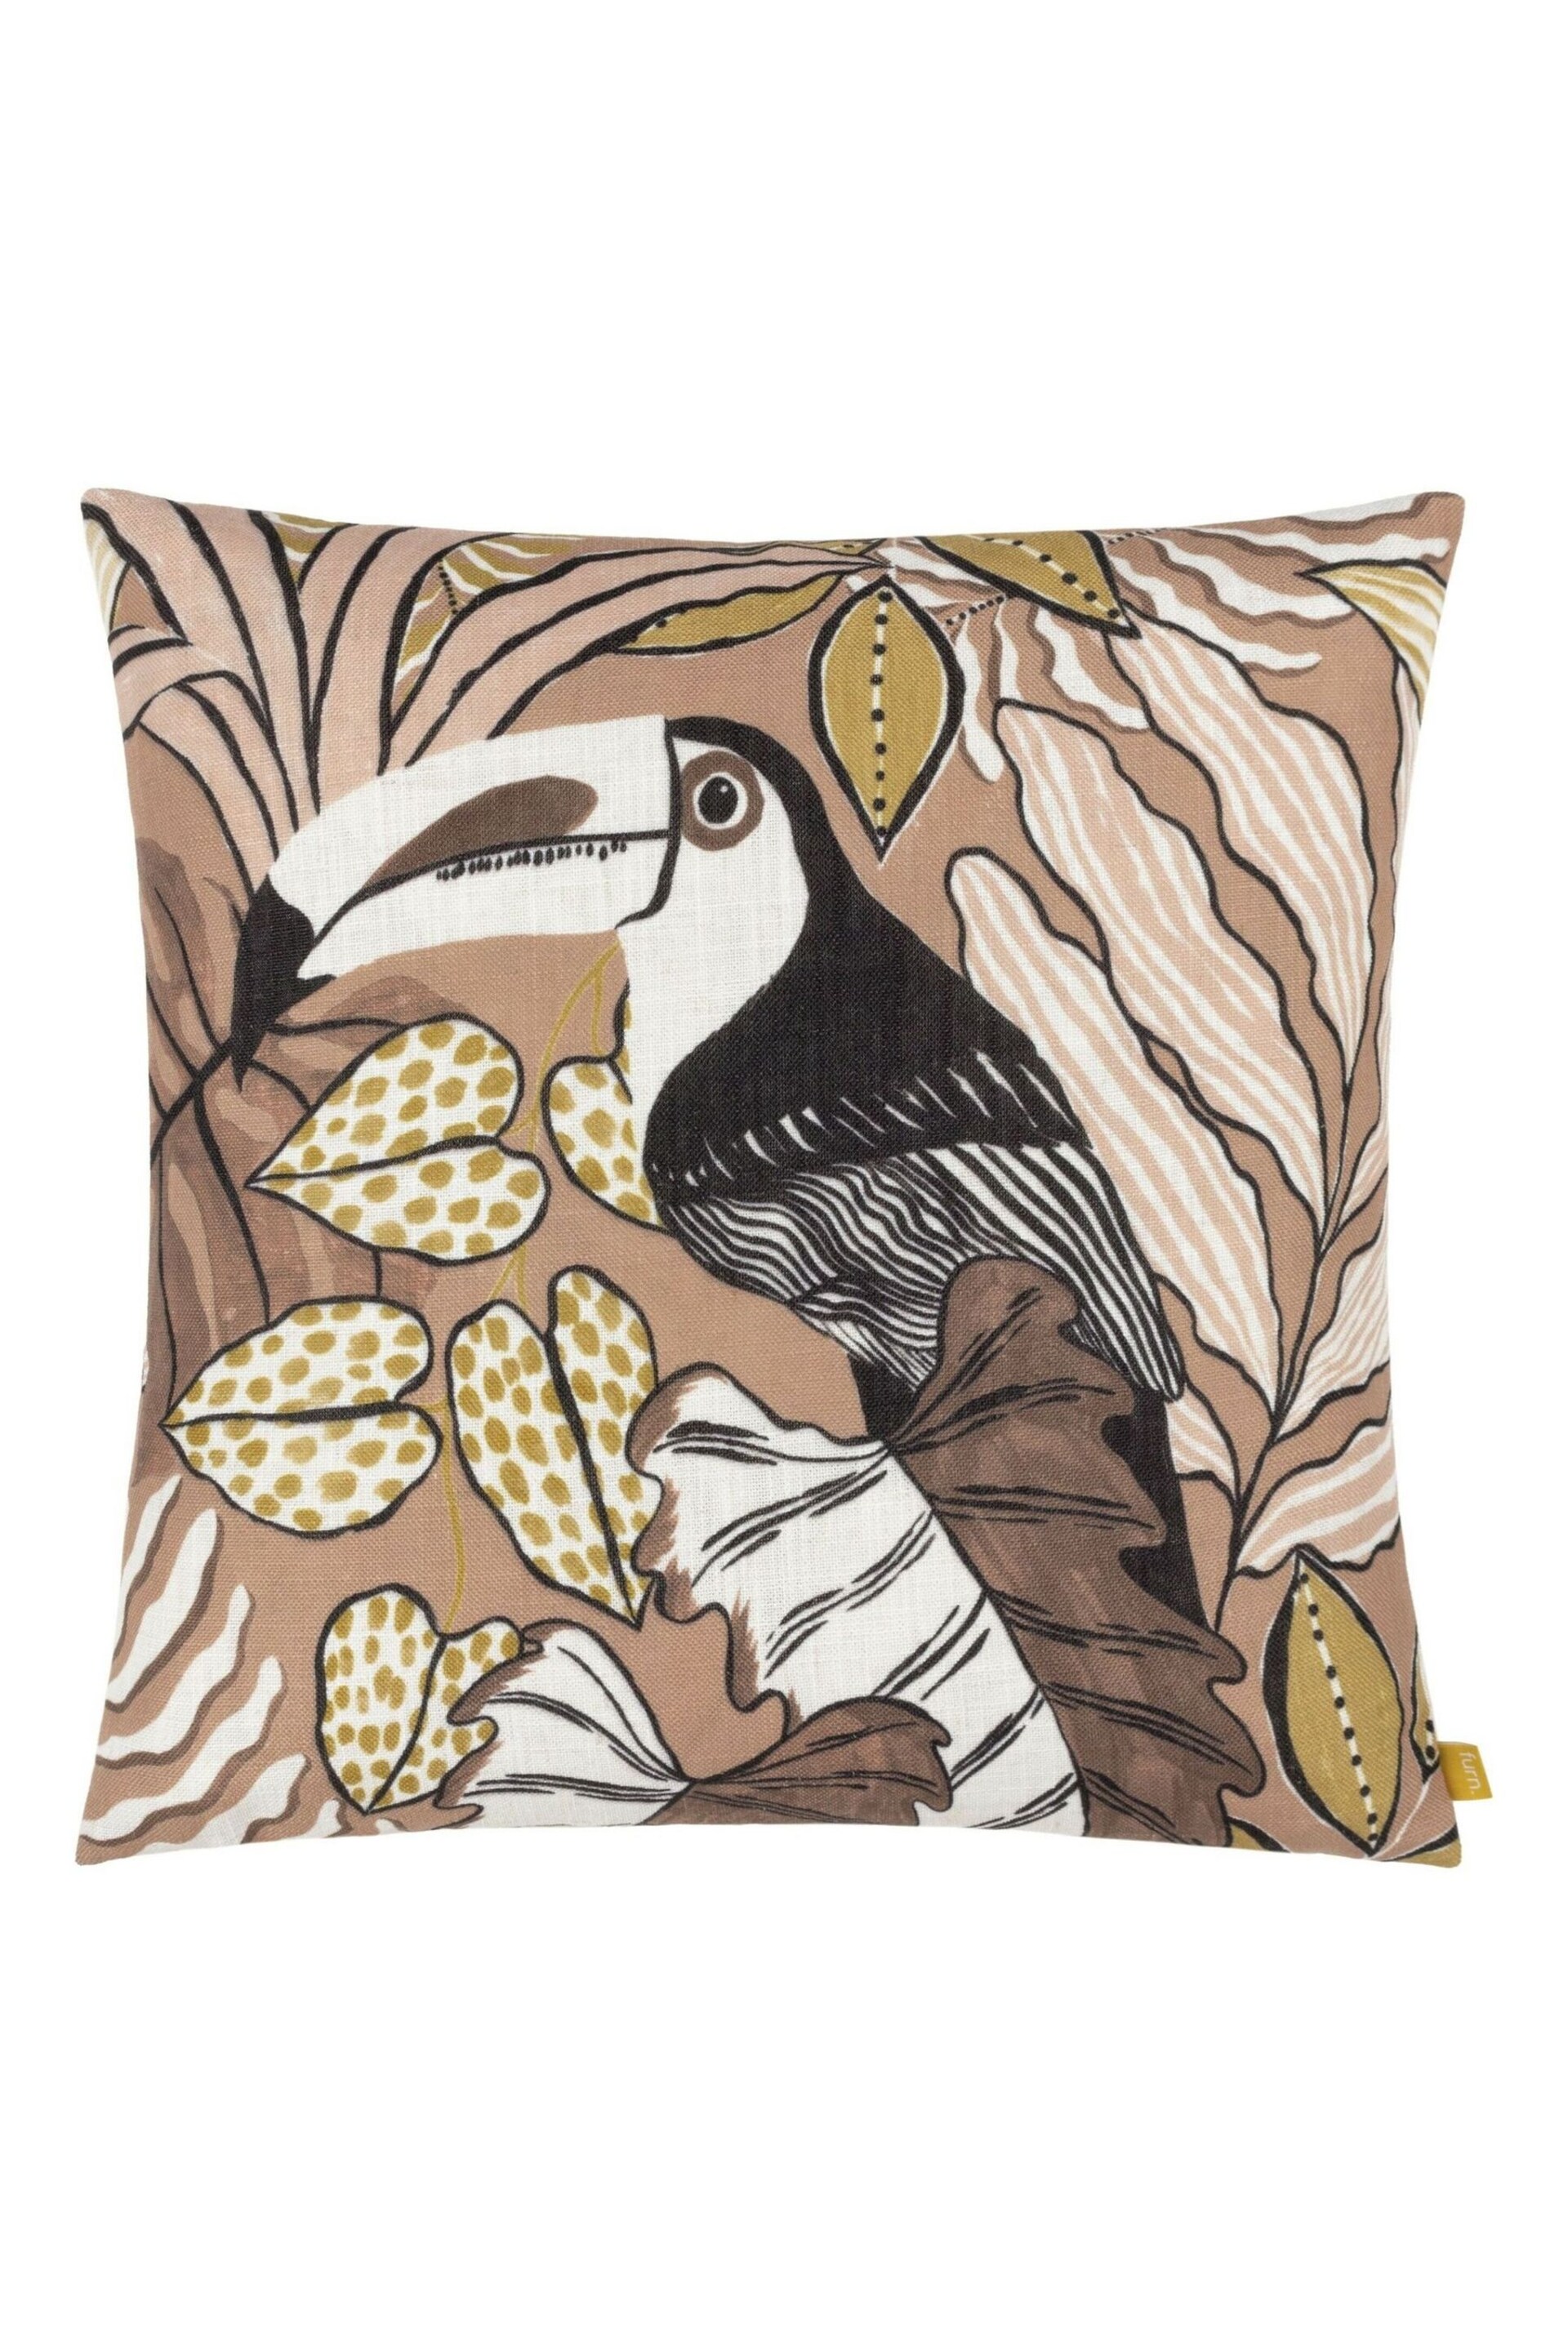 Furn Natural Tocorico Tropical Polyester Filled Cushion - Image 2 of 5